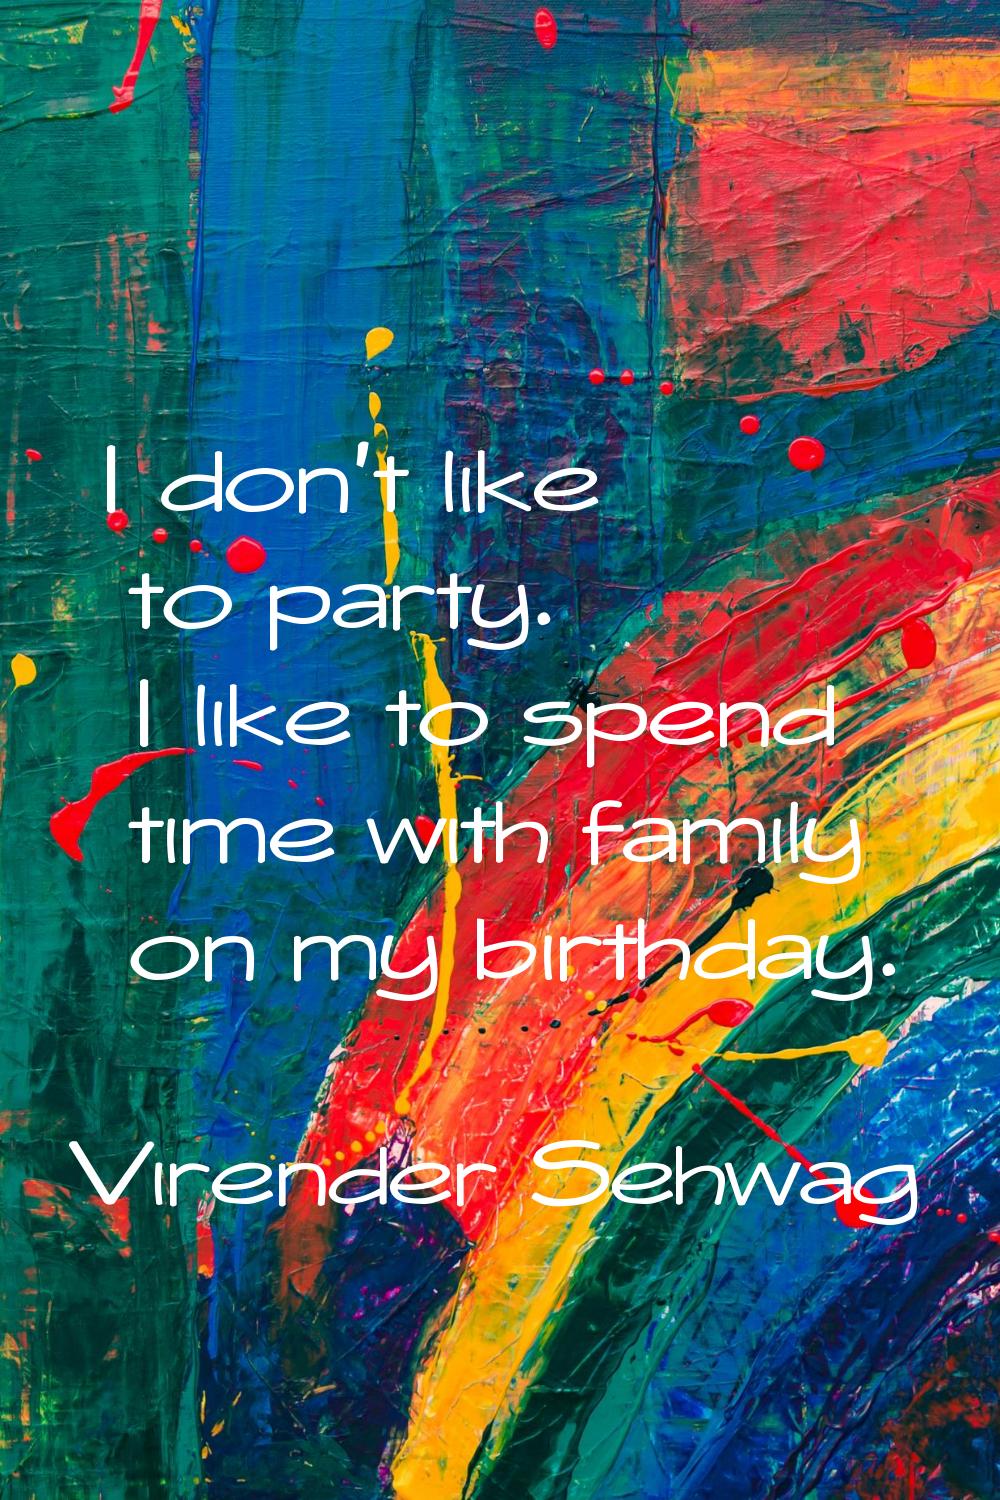 I don't like to party. I like to spend time with family on my birthday.